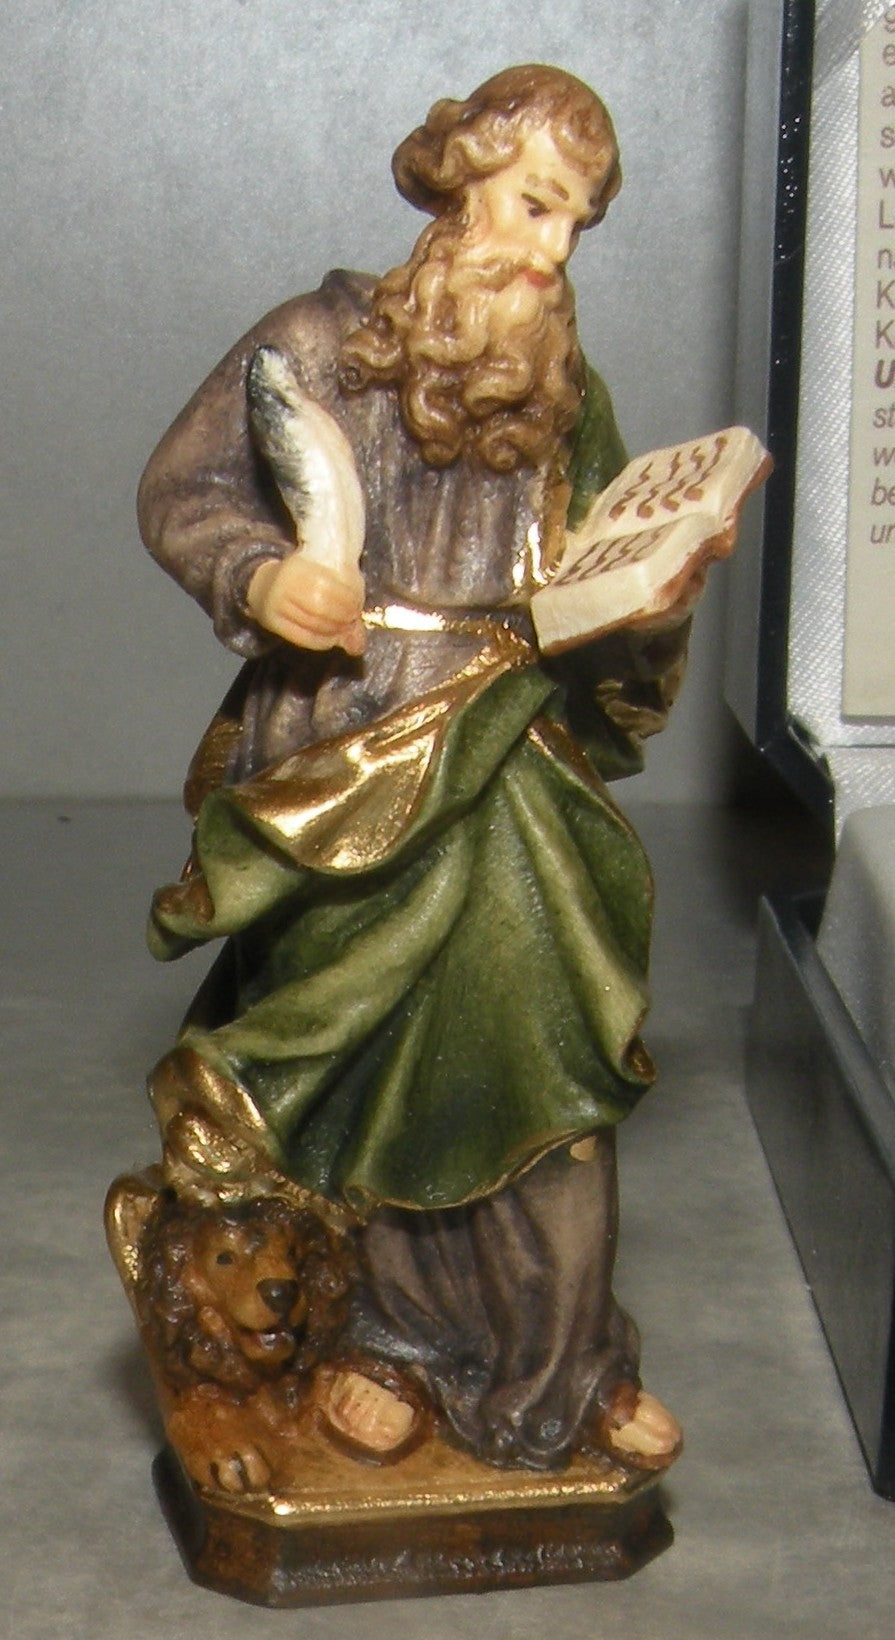 St.Marcus Evangelist  with Case ( 10281 ), Lepi